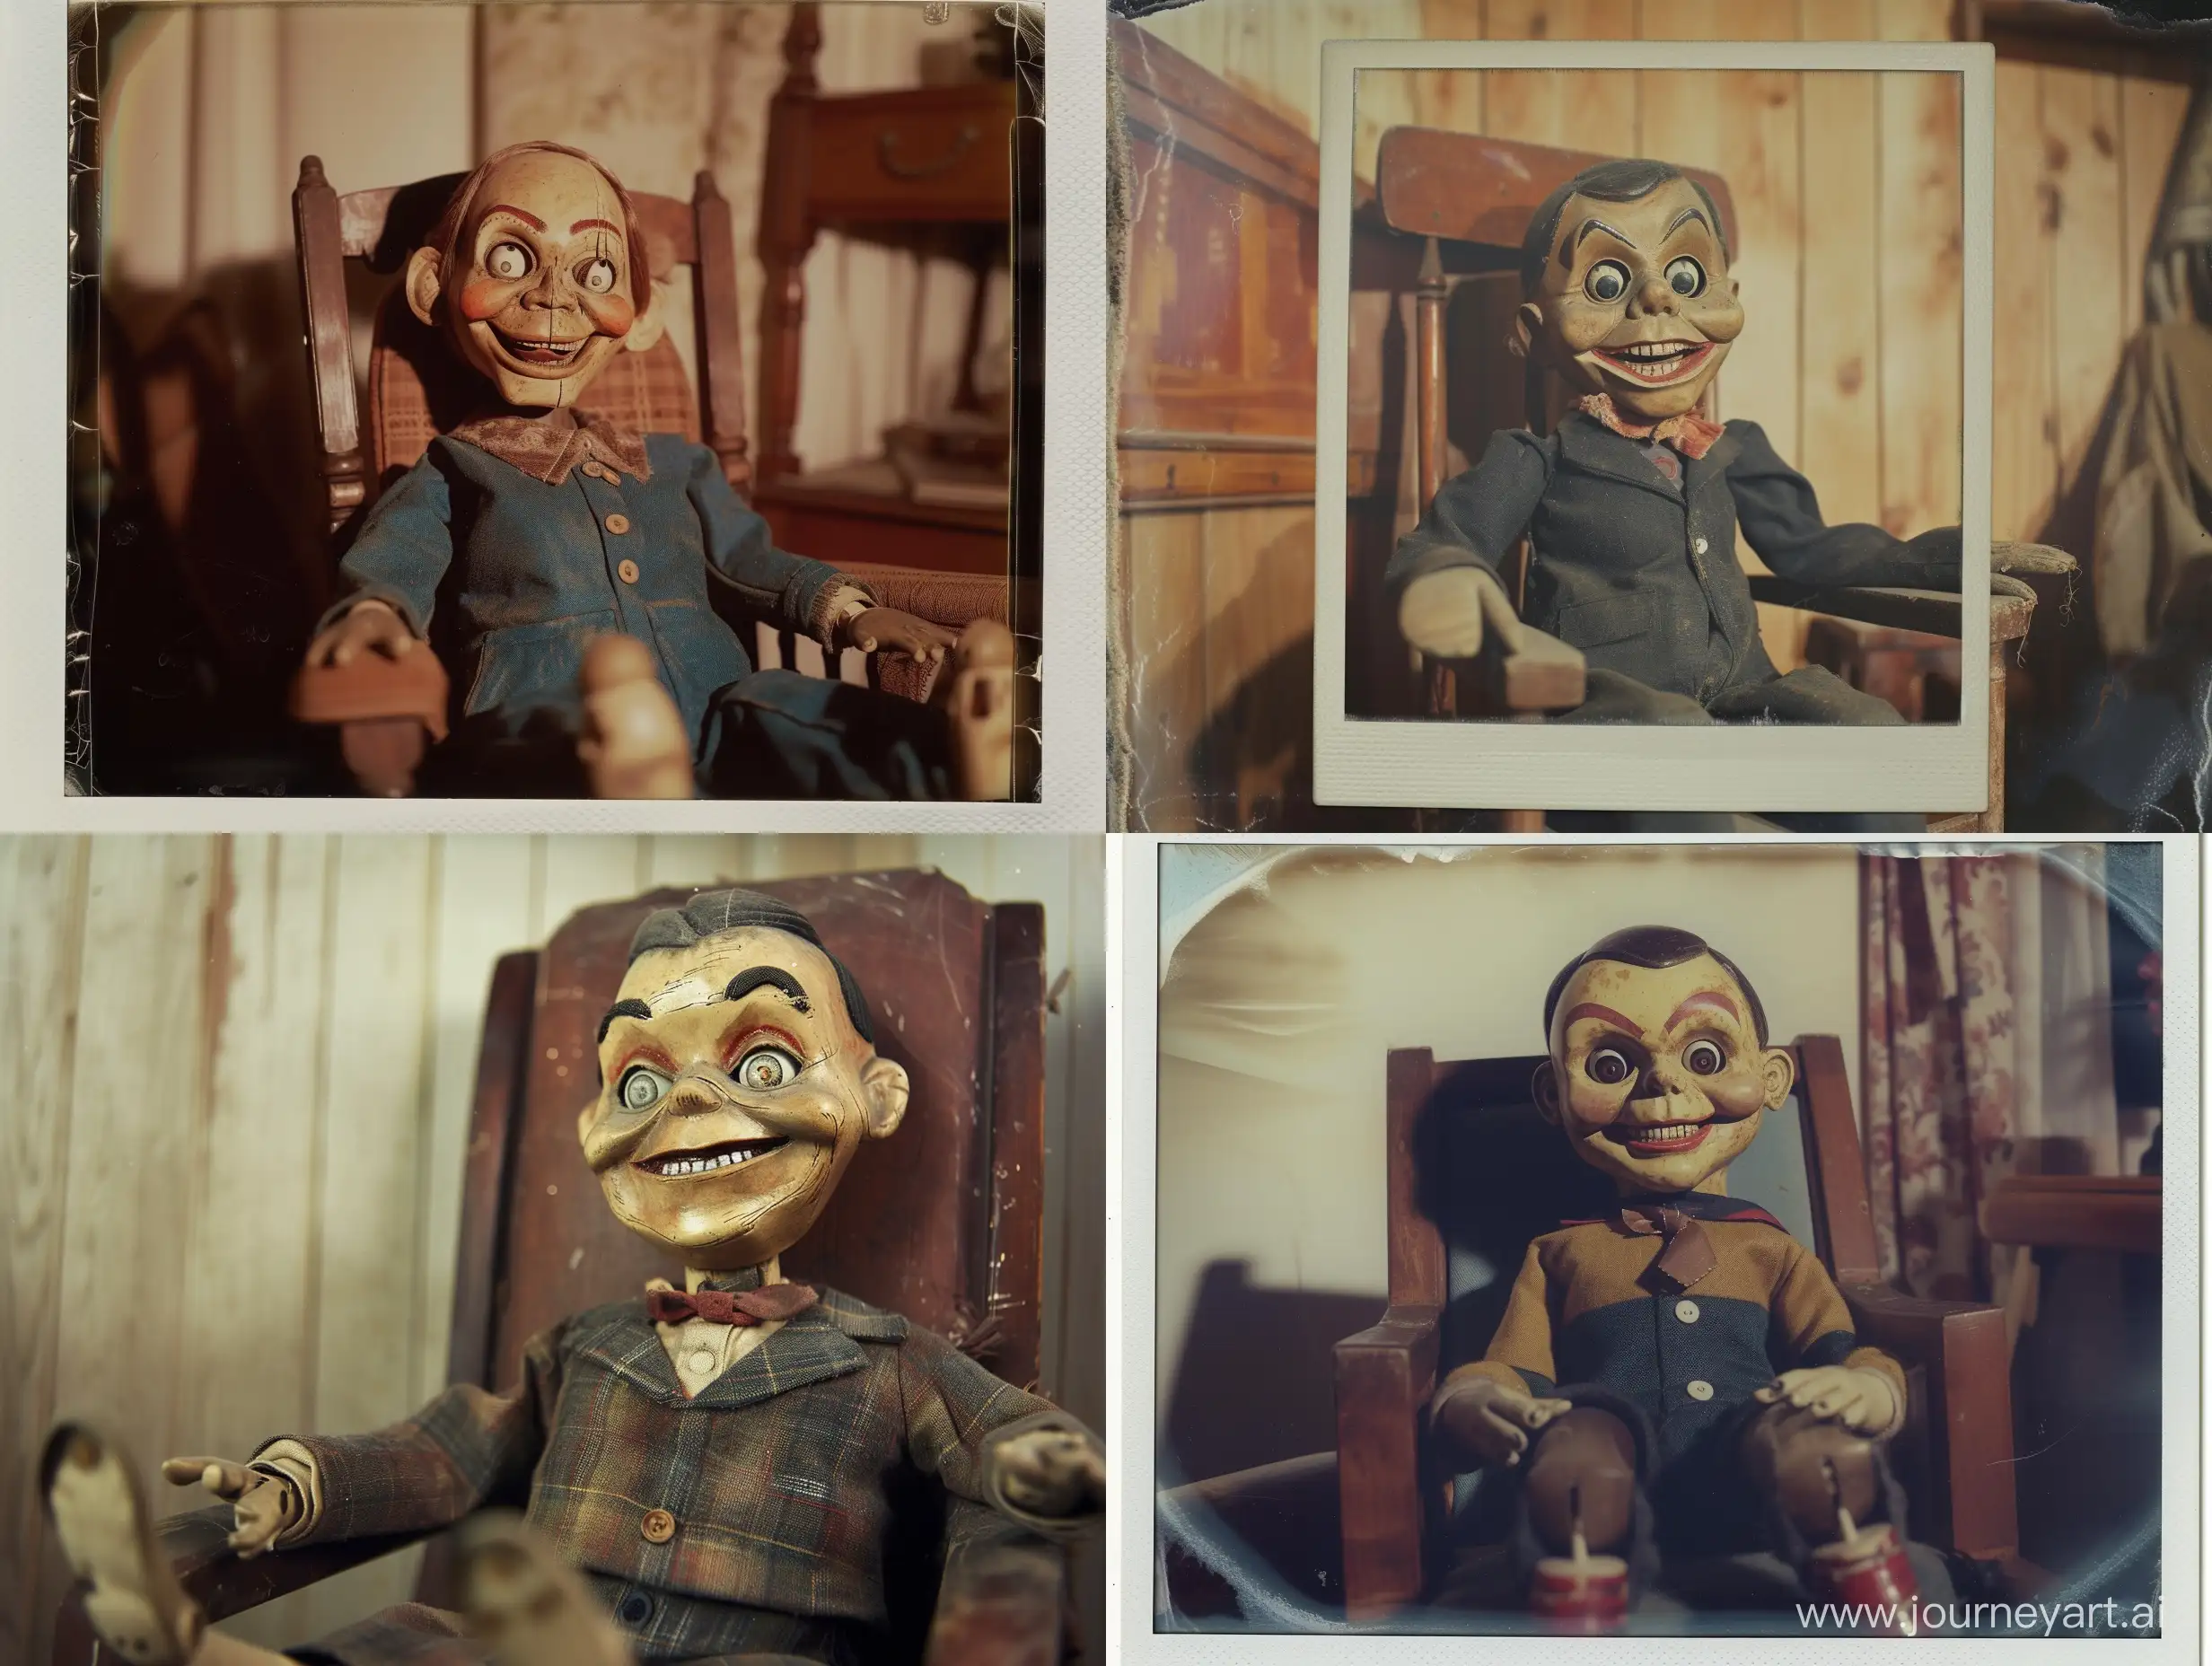 A creepy, scary old realistic Polaroid photo of a ventriloquist dummy sitting in a chair and smiling 